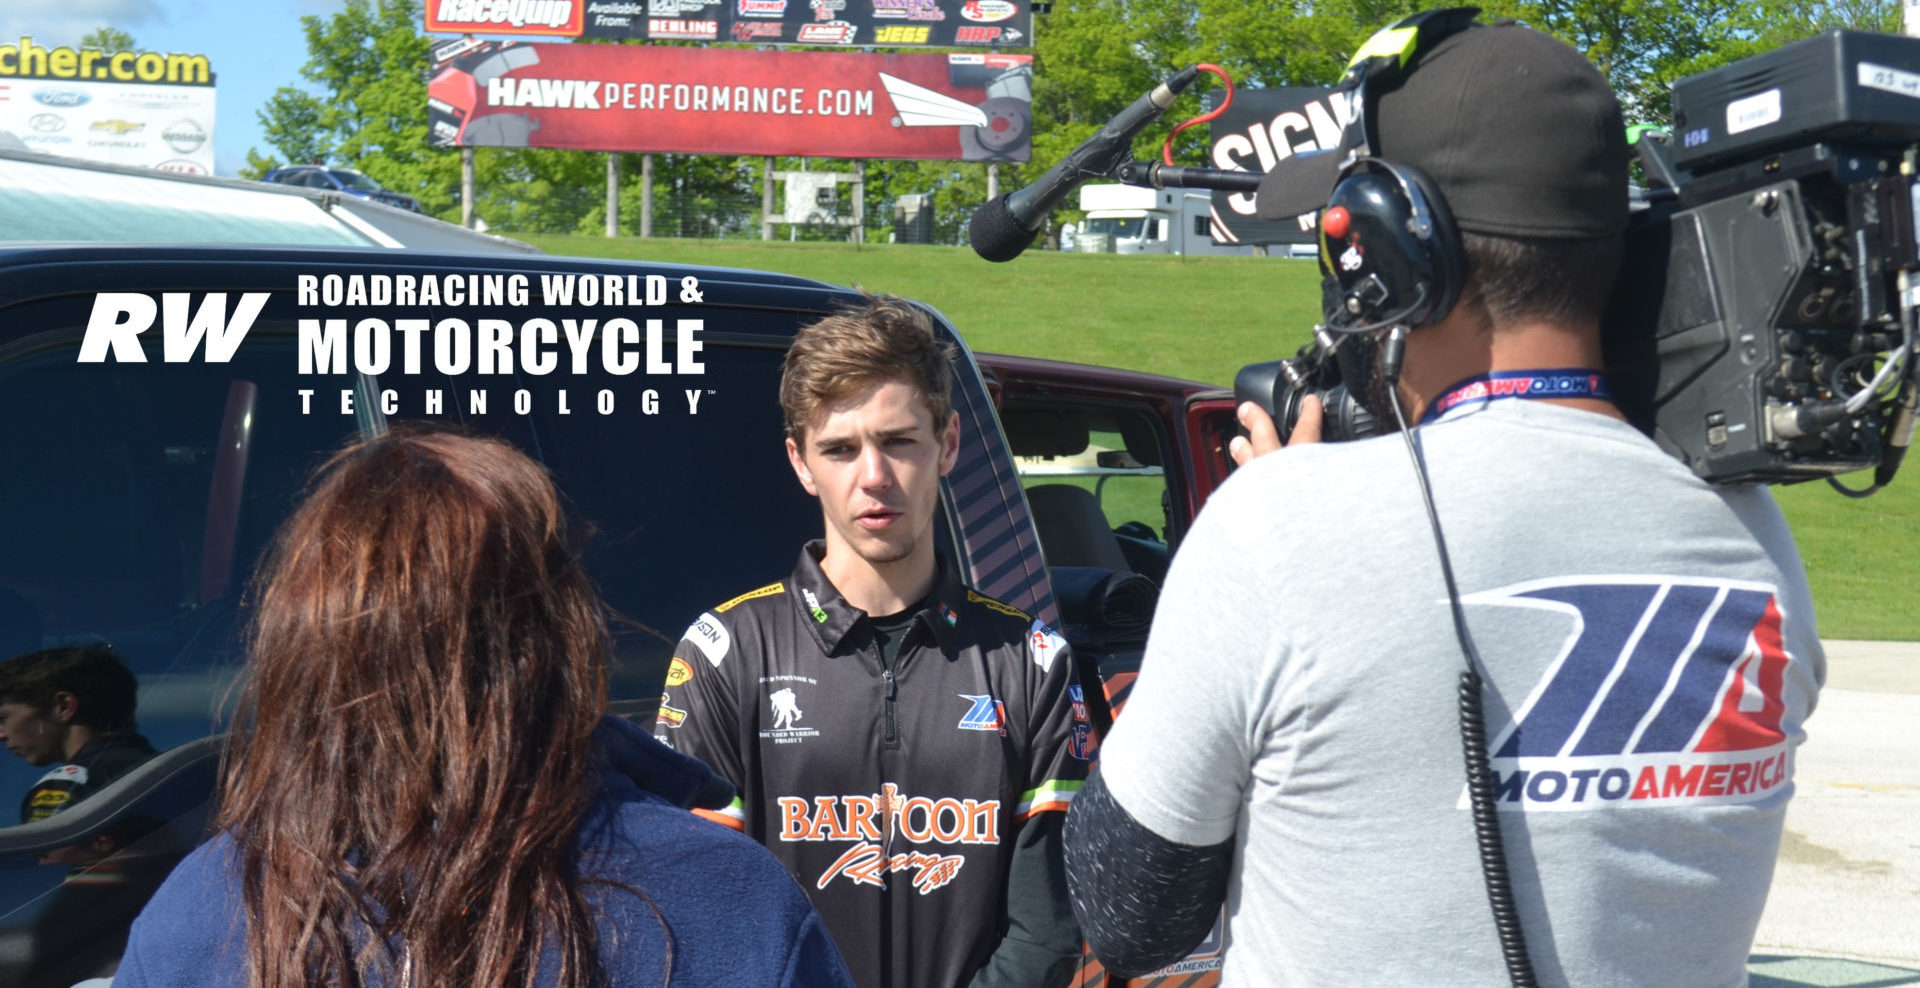 MotoAmerica Junior Cup racer and recent high school graduate Dominic Doyle getting interviewed by a camera crew after breaking the lap record and securing pole position for his races at Road America. Photo by David Swarts.